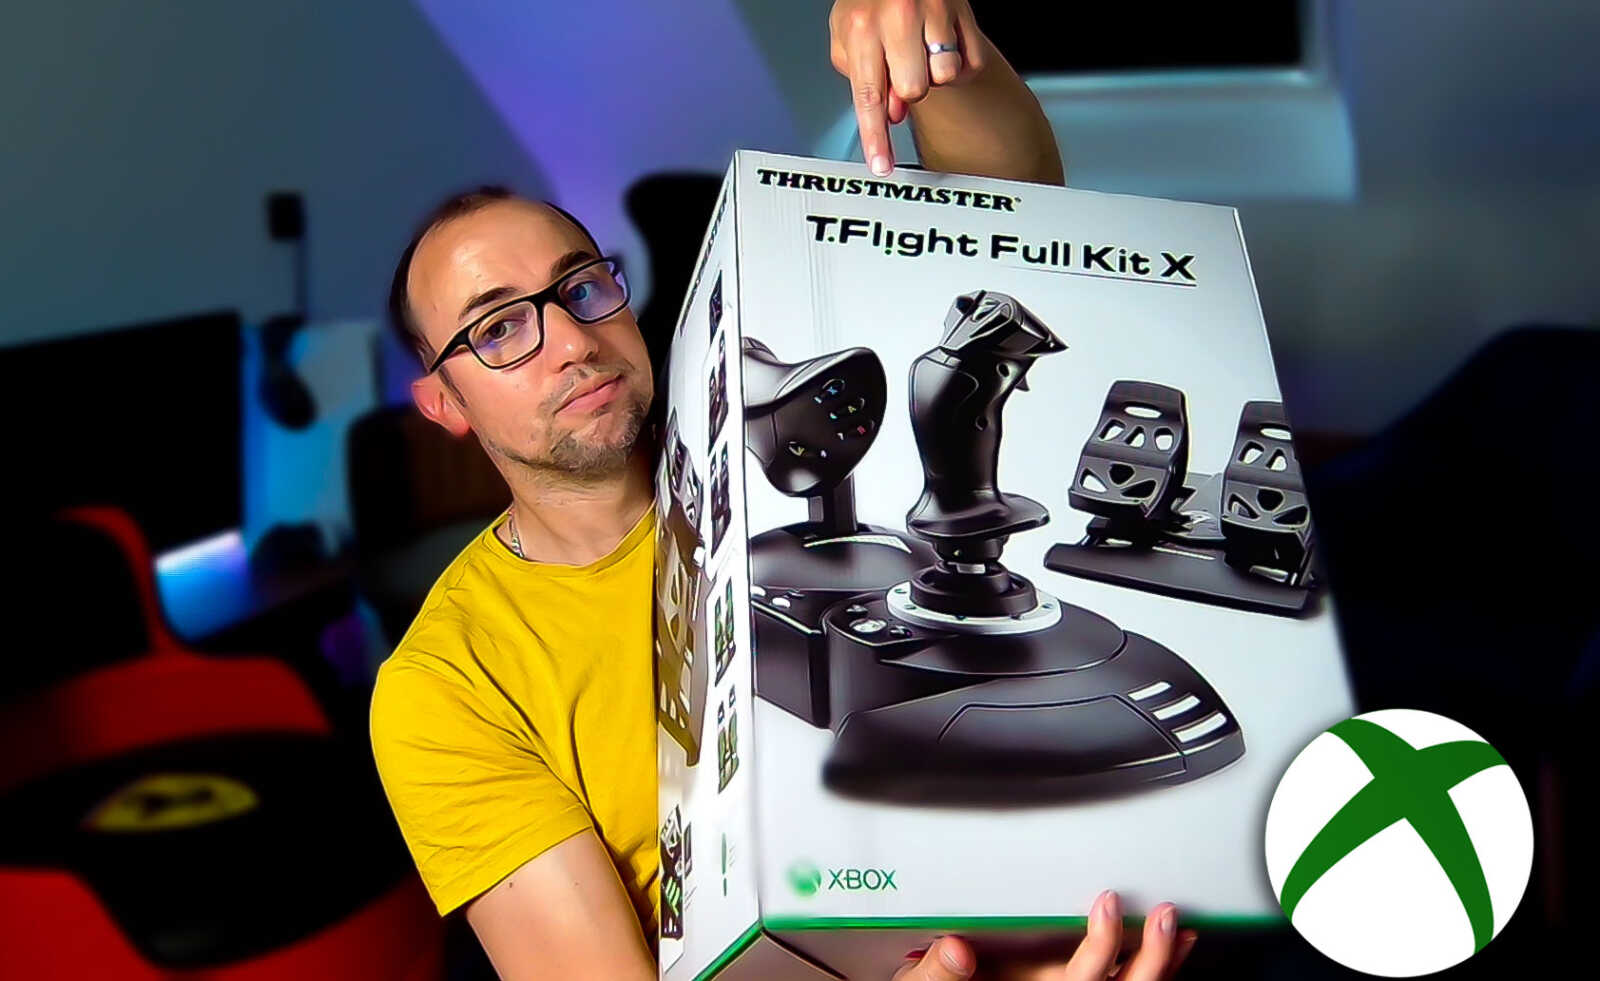 The Thrustmaster FULL KIT X is also available on Farming Simulator  (UNBOXING and REVIEW)